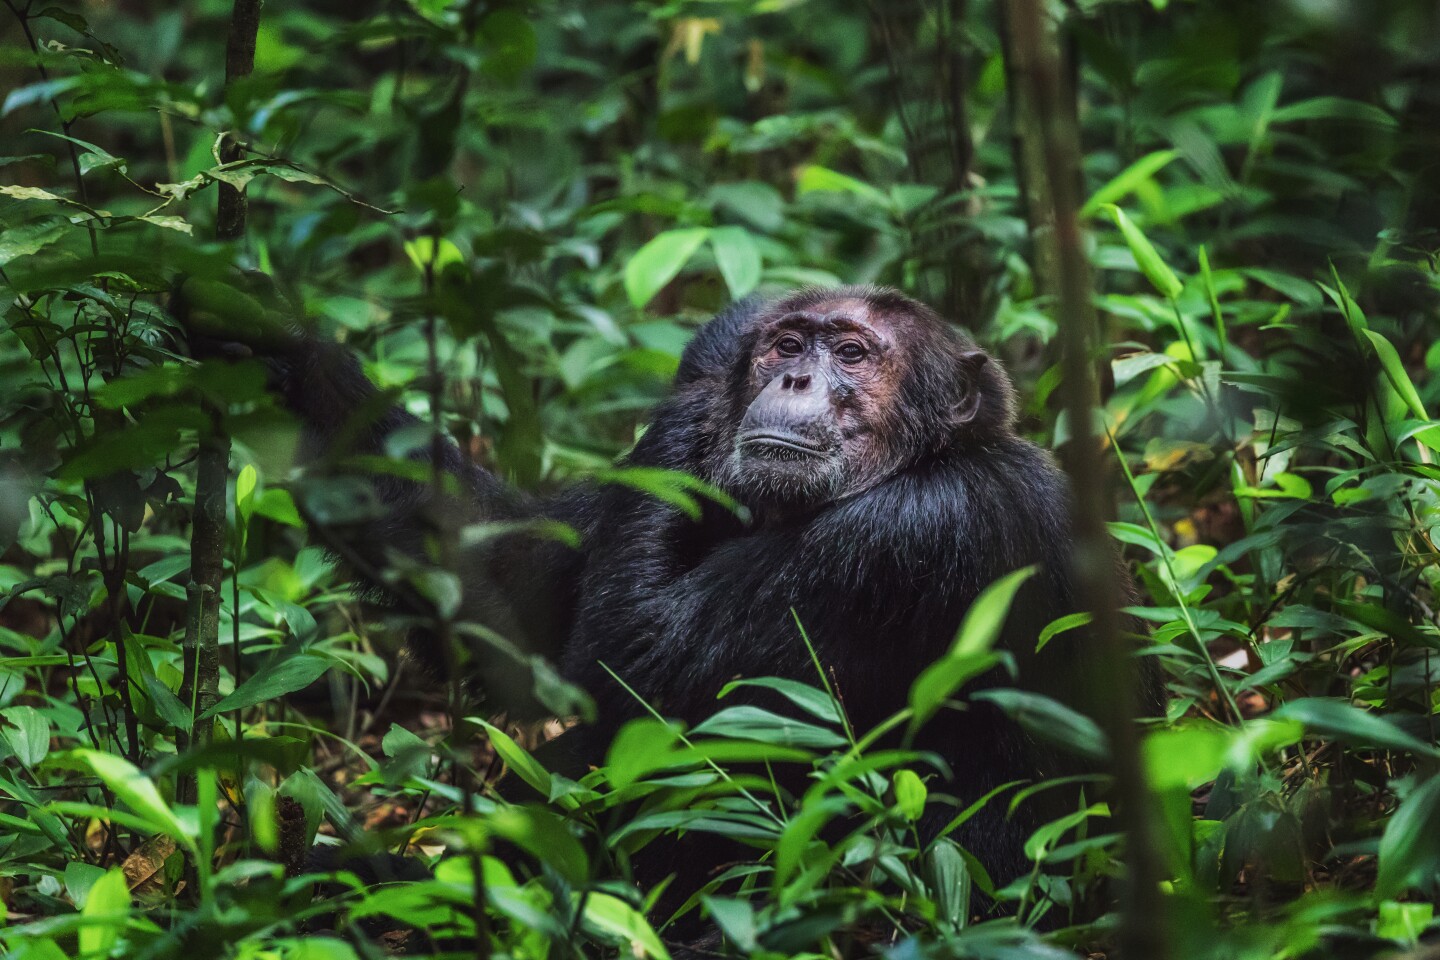 <h2>Kibale Forest National Park</h2> <ul>   <li><b>Go for</b>: A chance to spend time with habituated chimpanzees and other primates</li>   <li><b>Location</b>: <a class="Link" href="https://maps.app.goo.gl/Z6G28NbBTqKC51uT7" rel="noopener">Google Maps</a></li>  </ul> <p>From Murchison Falls, take a daylong drive southwest to <a class="Link" href="https://www.kibaleforestnationalpark.com/" rel="noopener">Kibale Forest National Park</a>, which has a relatively small footprint at just less than 300 square miles but offers a stunning diversity of primates. Nearly 1,500 chimpanzees live here, as do 12 other types of primates, including blue monkeys, gray-cheeked mangabeys, and red colobus monkeys. Bird enthusiasts can enjoy nearly 400 species, along with 250 types of butterflies.</p> <p>Kibale Forest National Park boasts rich cultural tourism. Travelers can learn about cultural traditions of the Batoro people and the Bakiga people, walk through a nearby village, and meet members of the <a class="Link" href="https://bigoditourism.com/" rel="noopener">Bigodi Women’s Group</a>, who make and sell baskets, jewelry, and other handicrafts.</p>